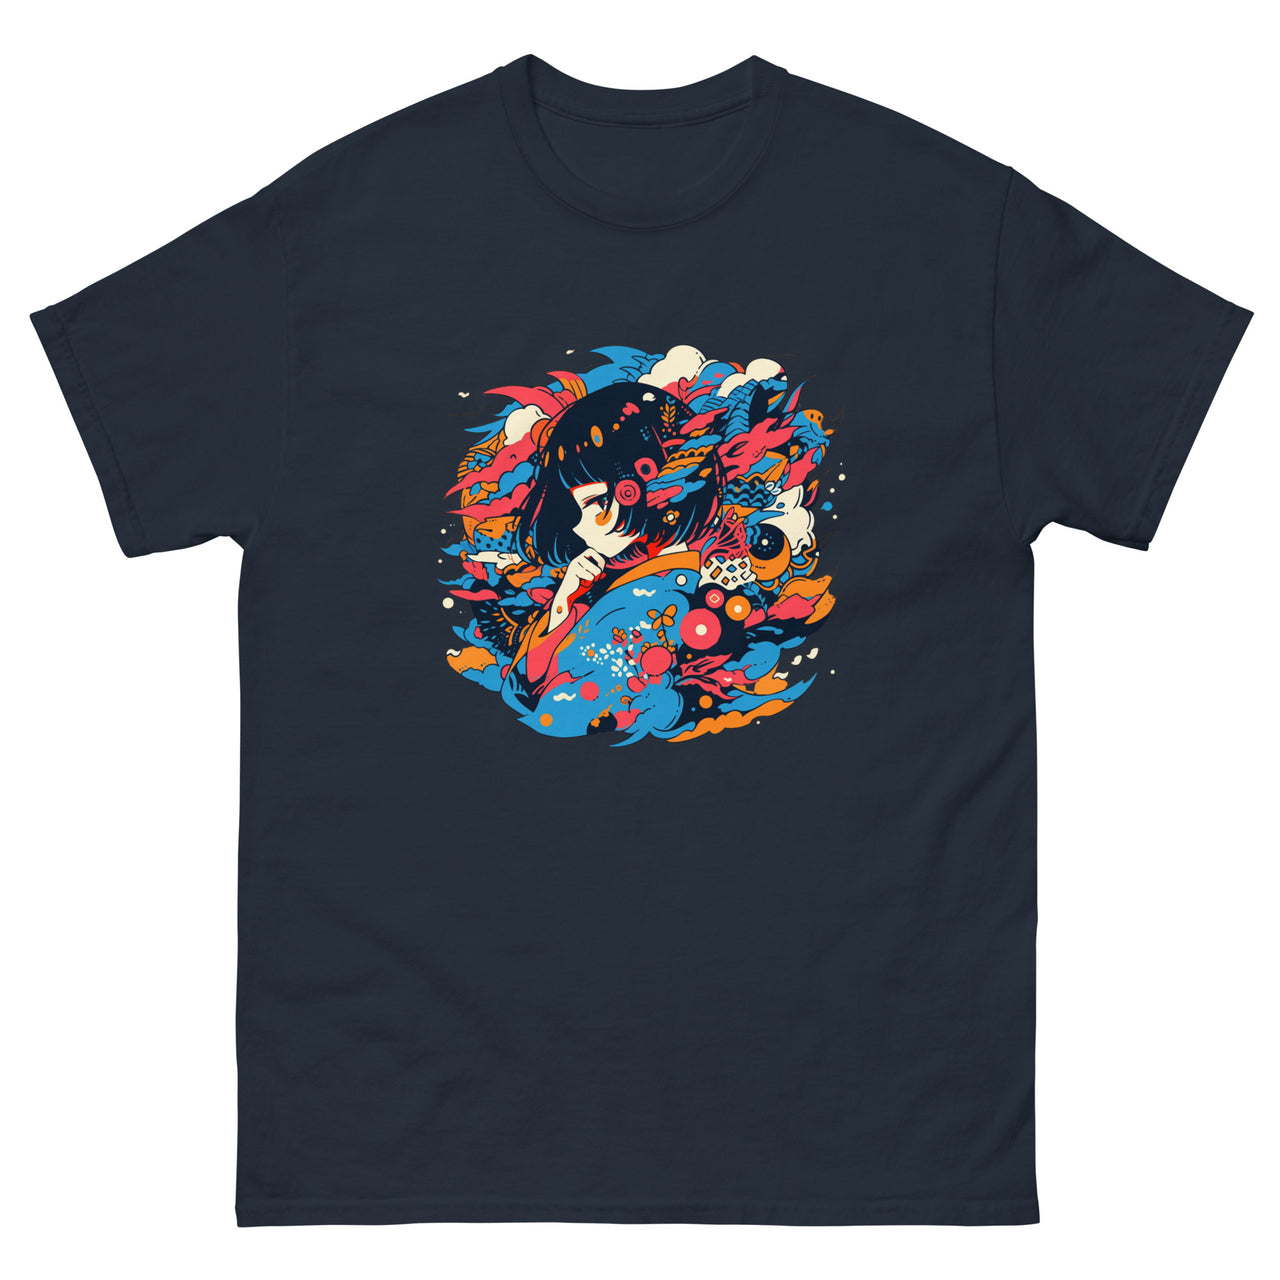 Lost in Thoughtful Contemplation Short-Sleeve Unisex T-Shirt